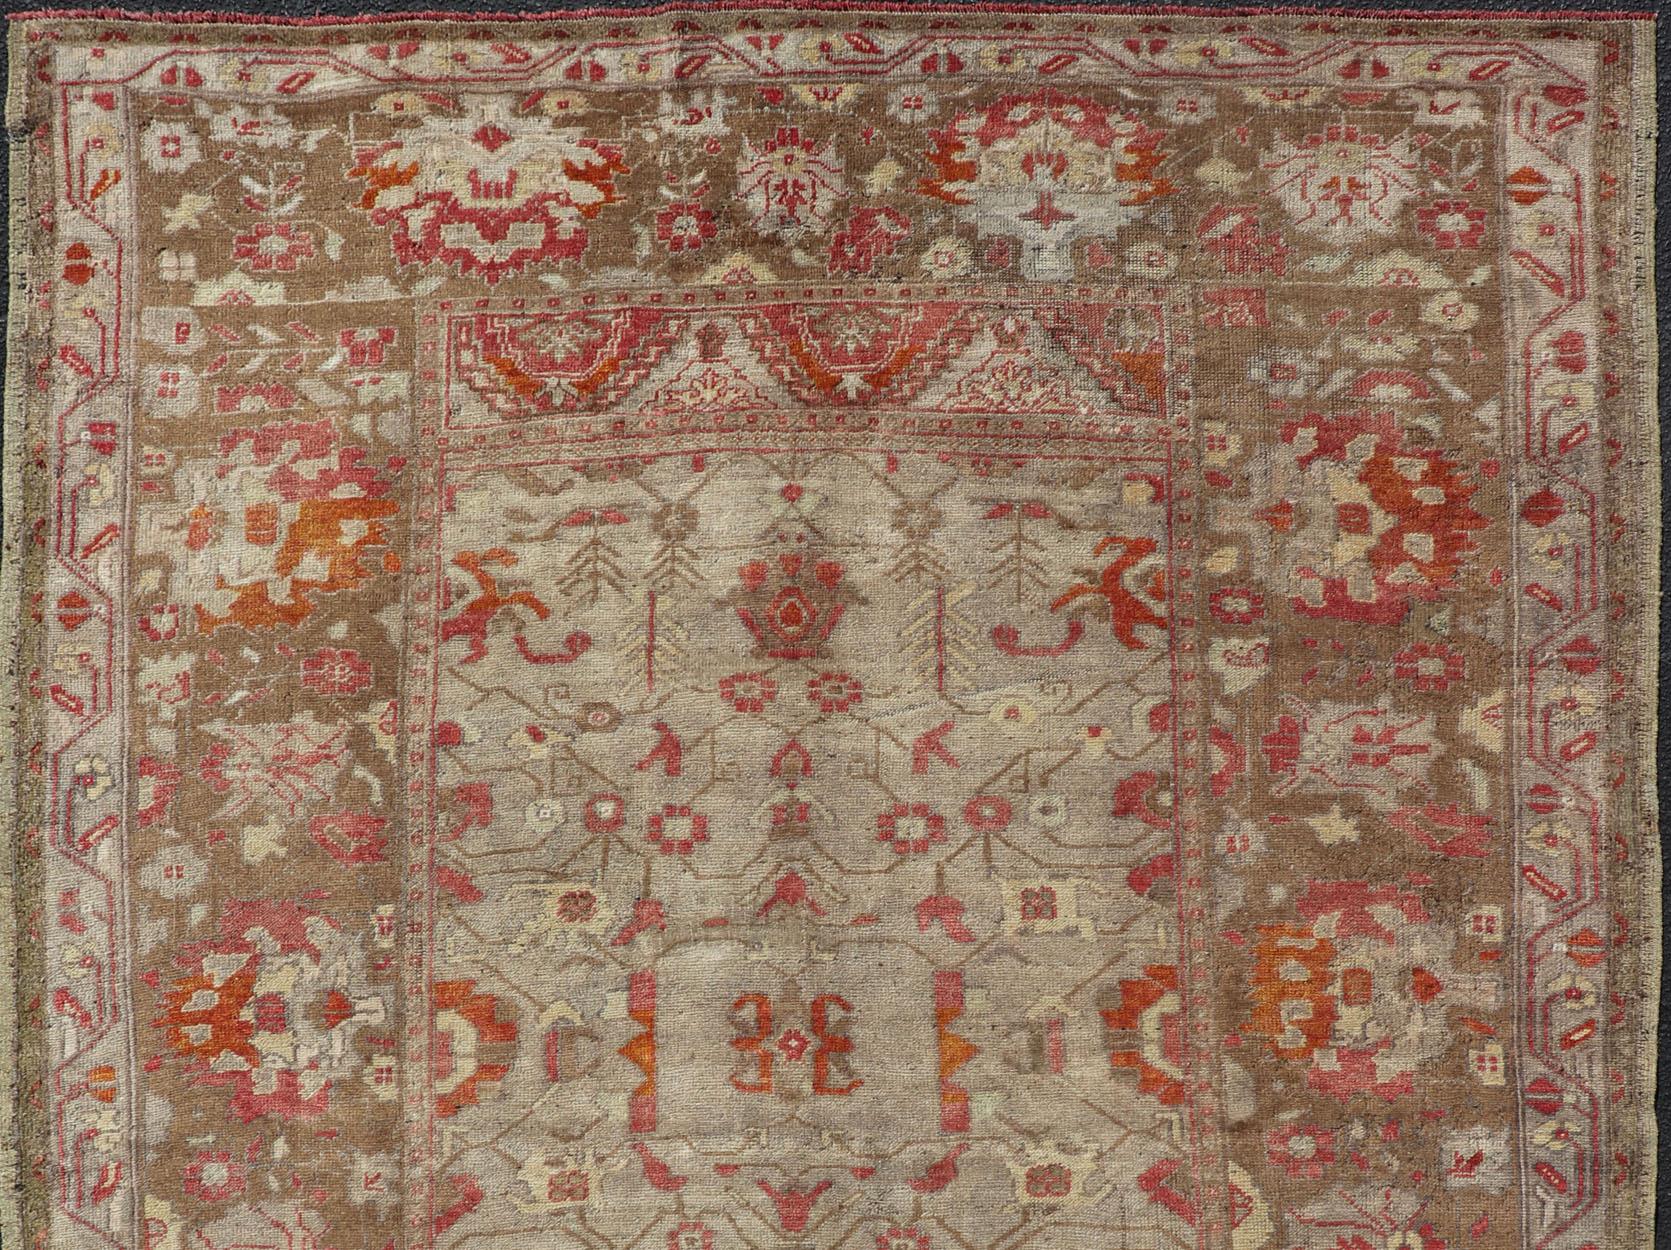 Square size Antique Turkish floral Oushak rug in green, red & tan.

Vintage Turkish Oushak Floral Medallion Design in Camel, brown, and red. Keivan Woven Arts / rug EN-180000, country of origin / type: Turkey / Oushak, circa 1930.

Measures: